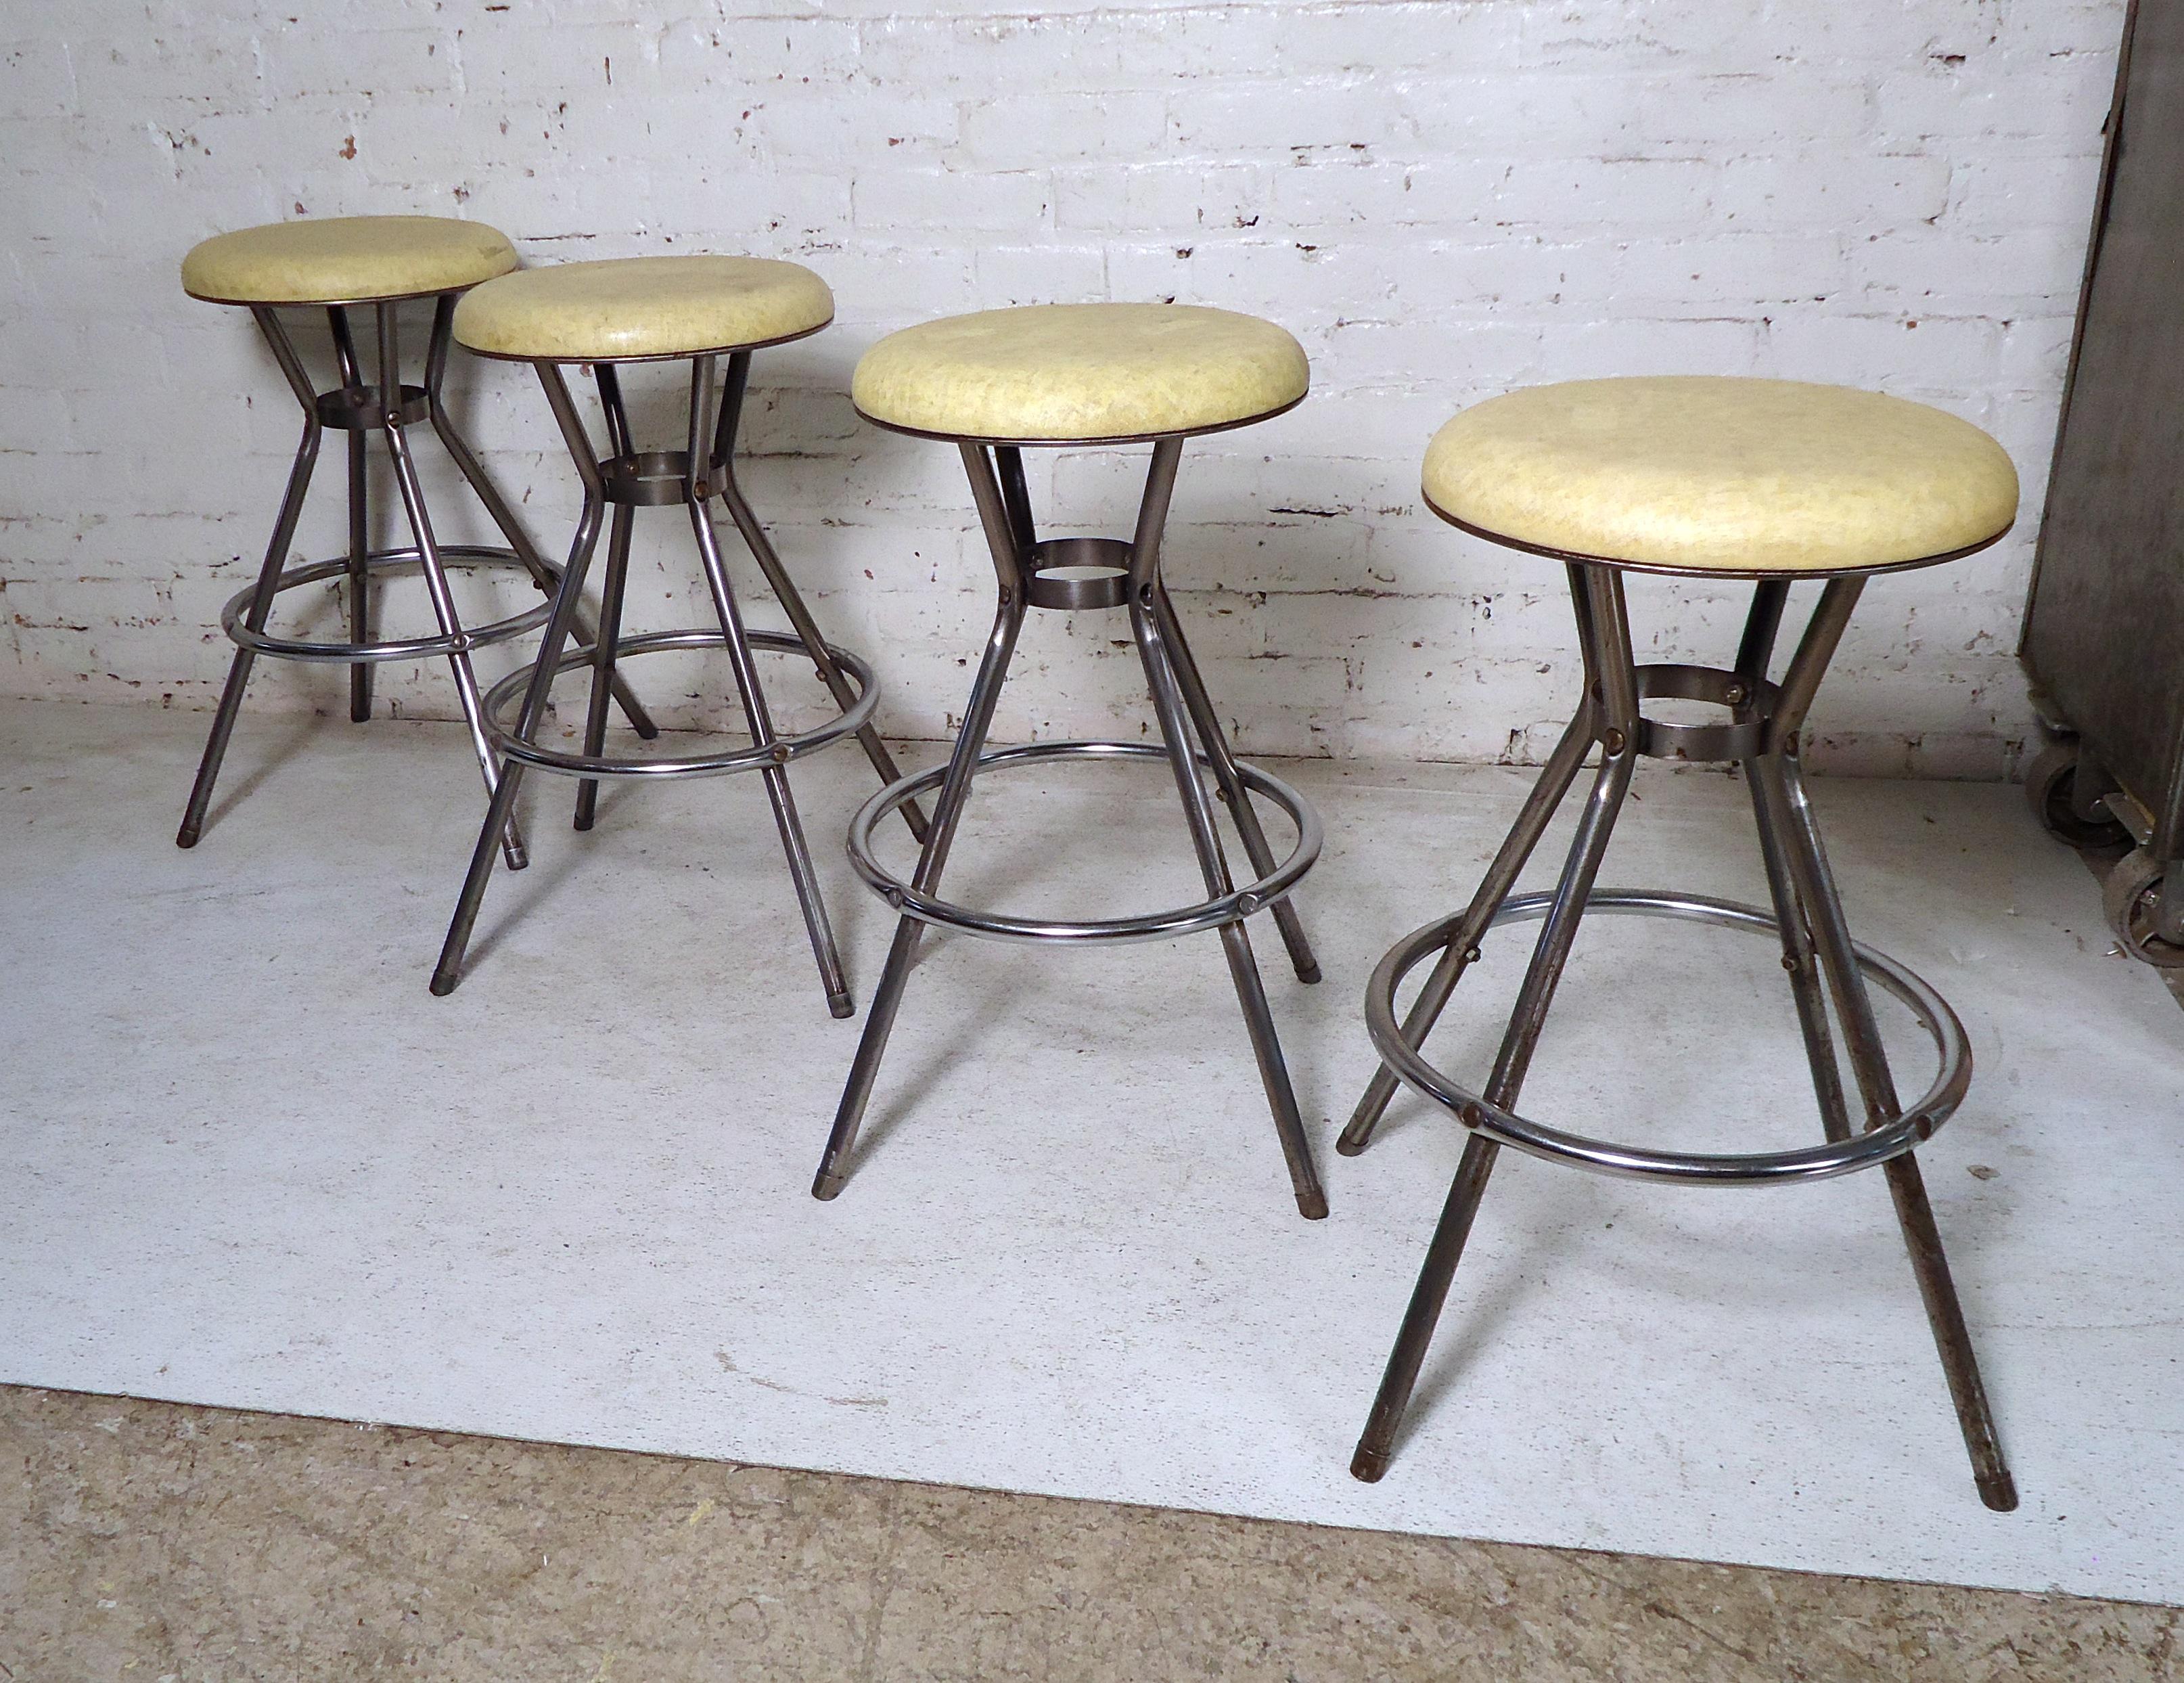 Set of Four Industrial Stools by Cosco In Good Condition For Sale In Brooklyn, NY